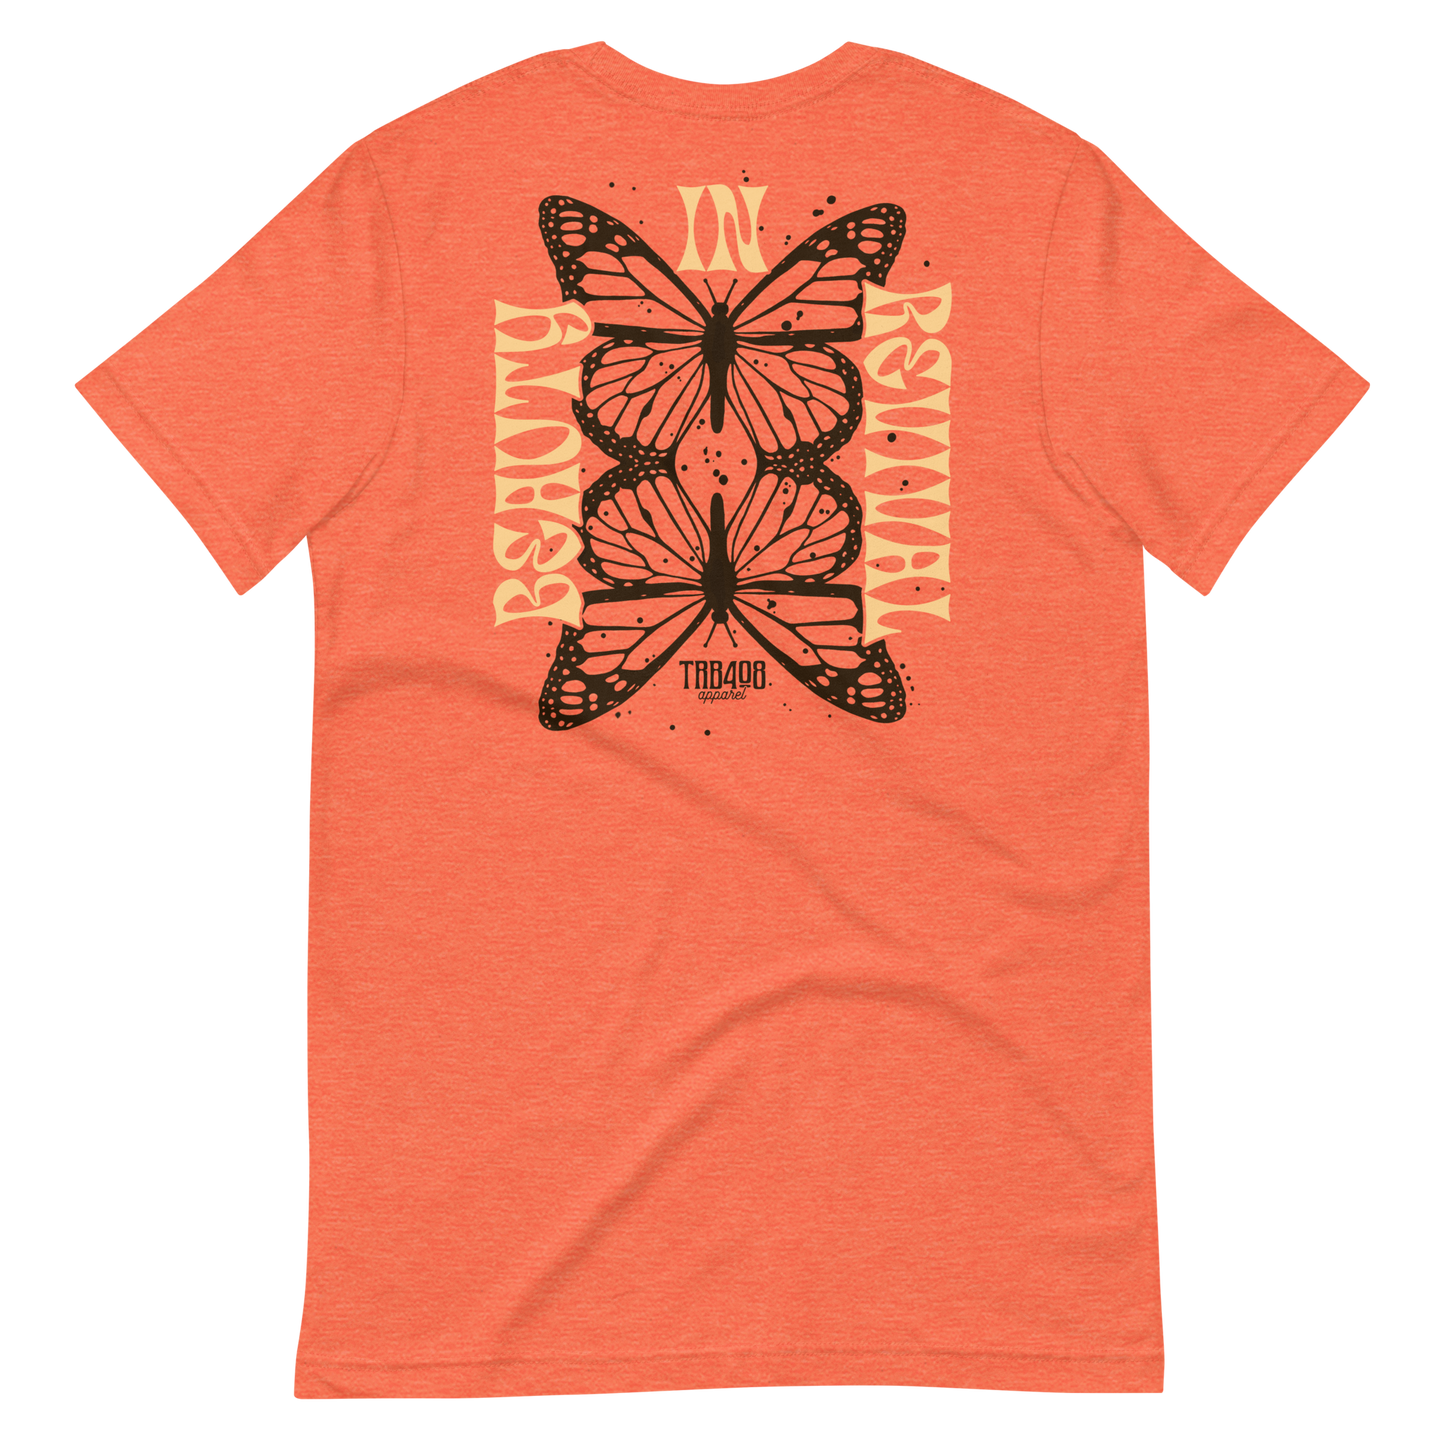 The BUTTERFLY Tee